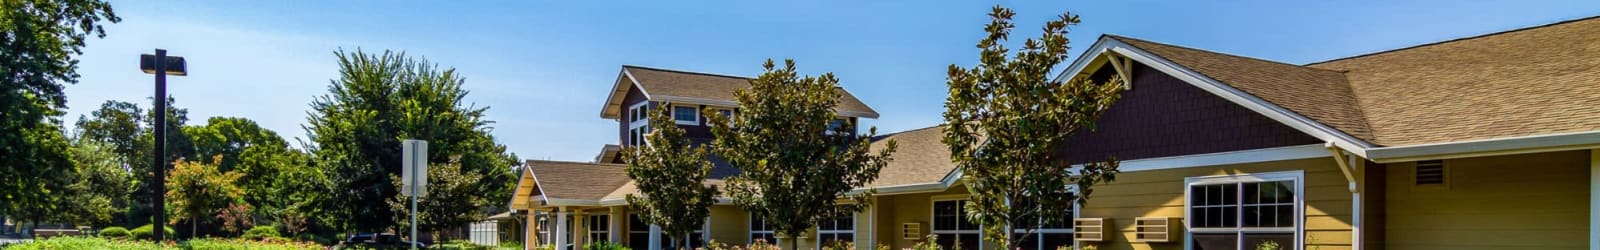 Amenities at Amber Grove Place in Chico, California. 